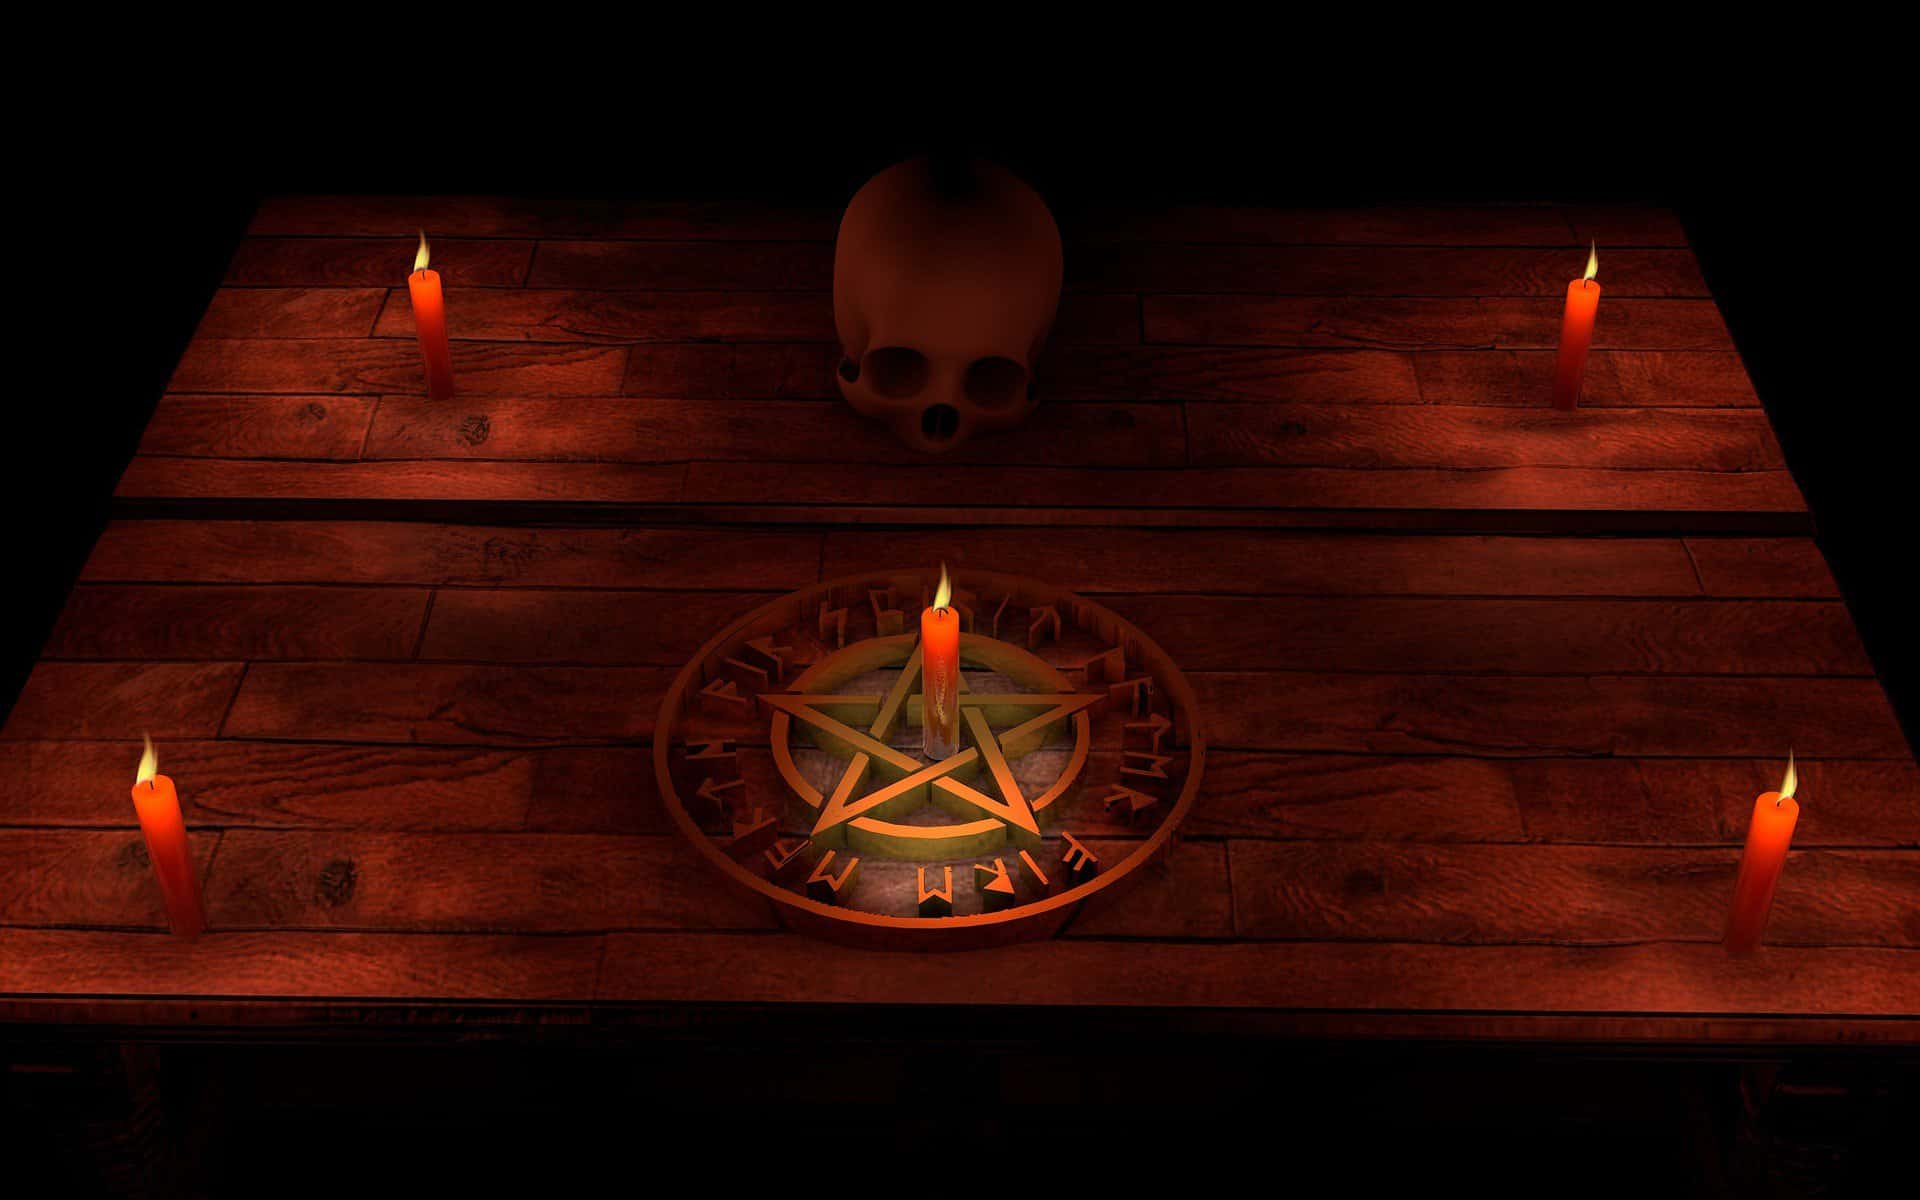 A pentagram is shown with a red candle in it's center, surrounded by other red candles and the whole image has a red cast.